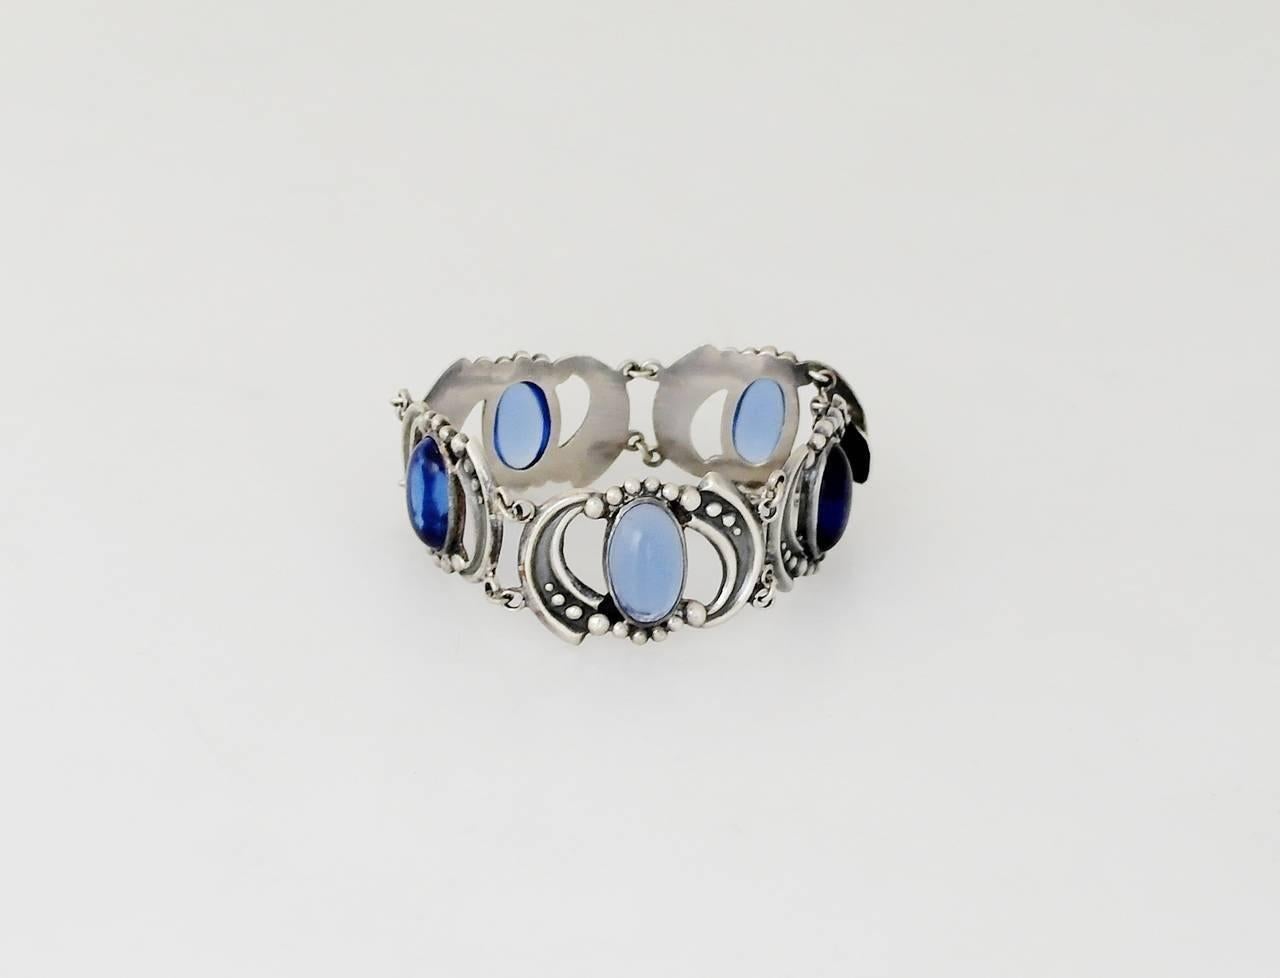 Being offered is a circa 1970 sterling silver bracelet by Los Castillo of Taxco, Mexico; silver bracelet comprising scroll & beaded links with blue glass cabochons. Dimensions: 3/4" wide; inner dimensions 6 3/4". Weight 1.5 oz. Marked